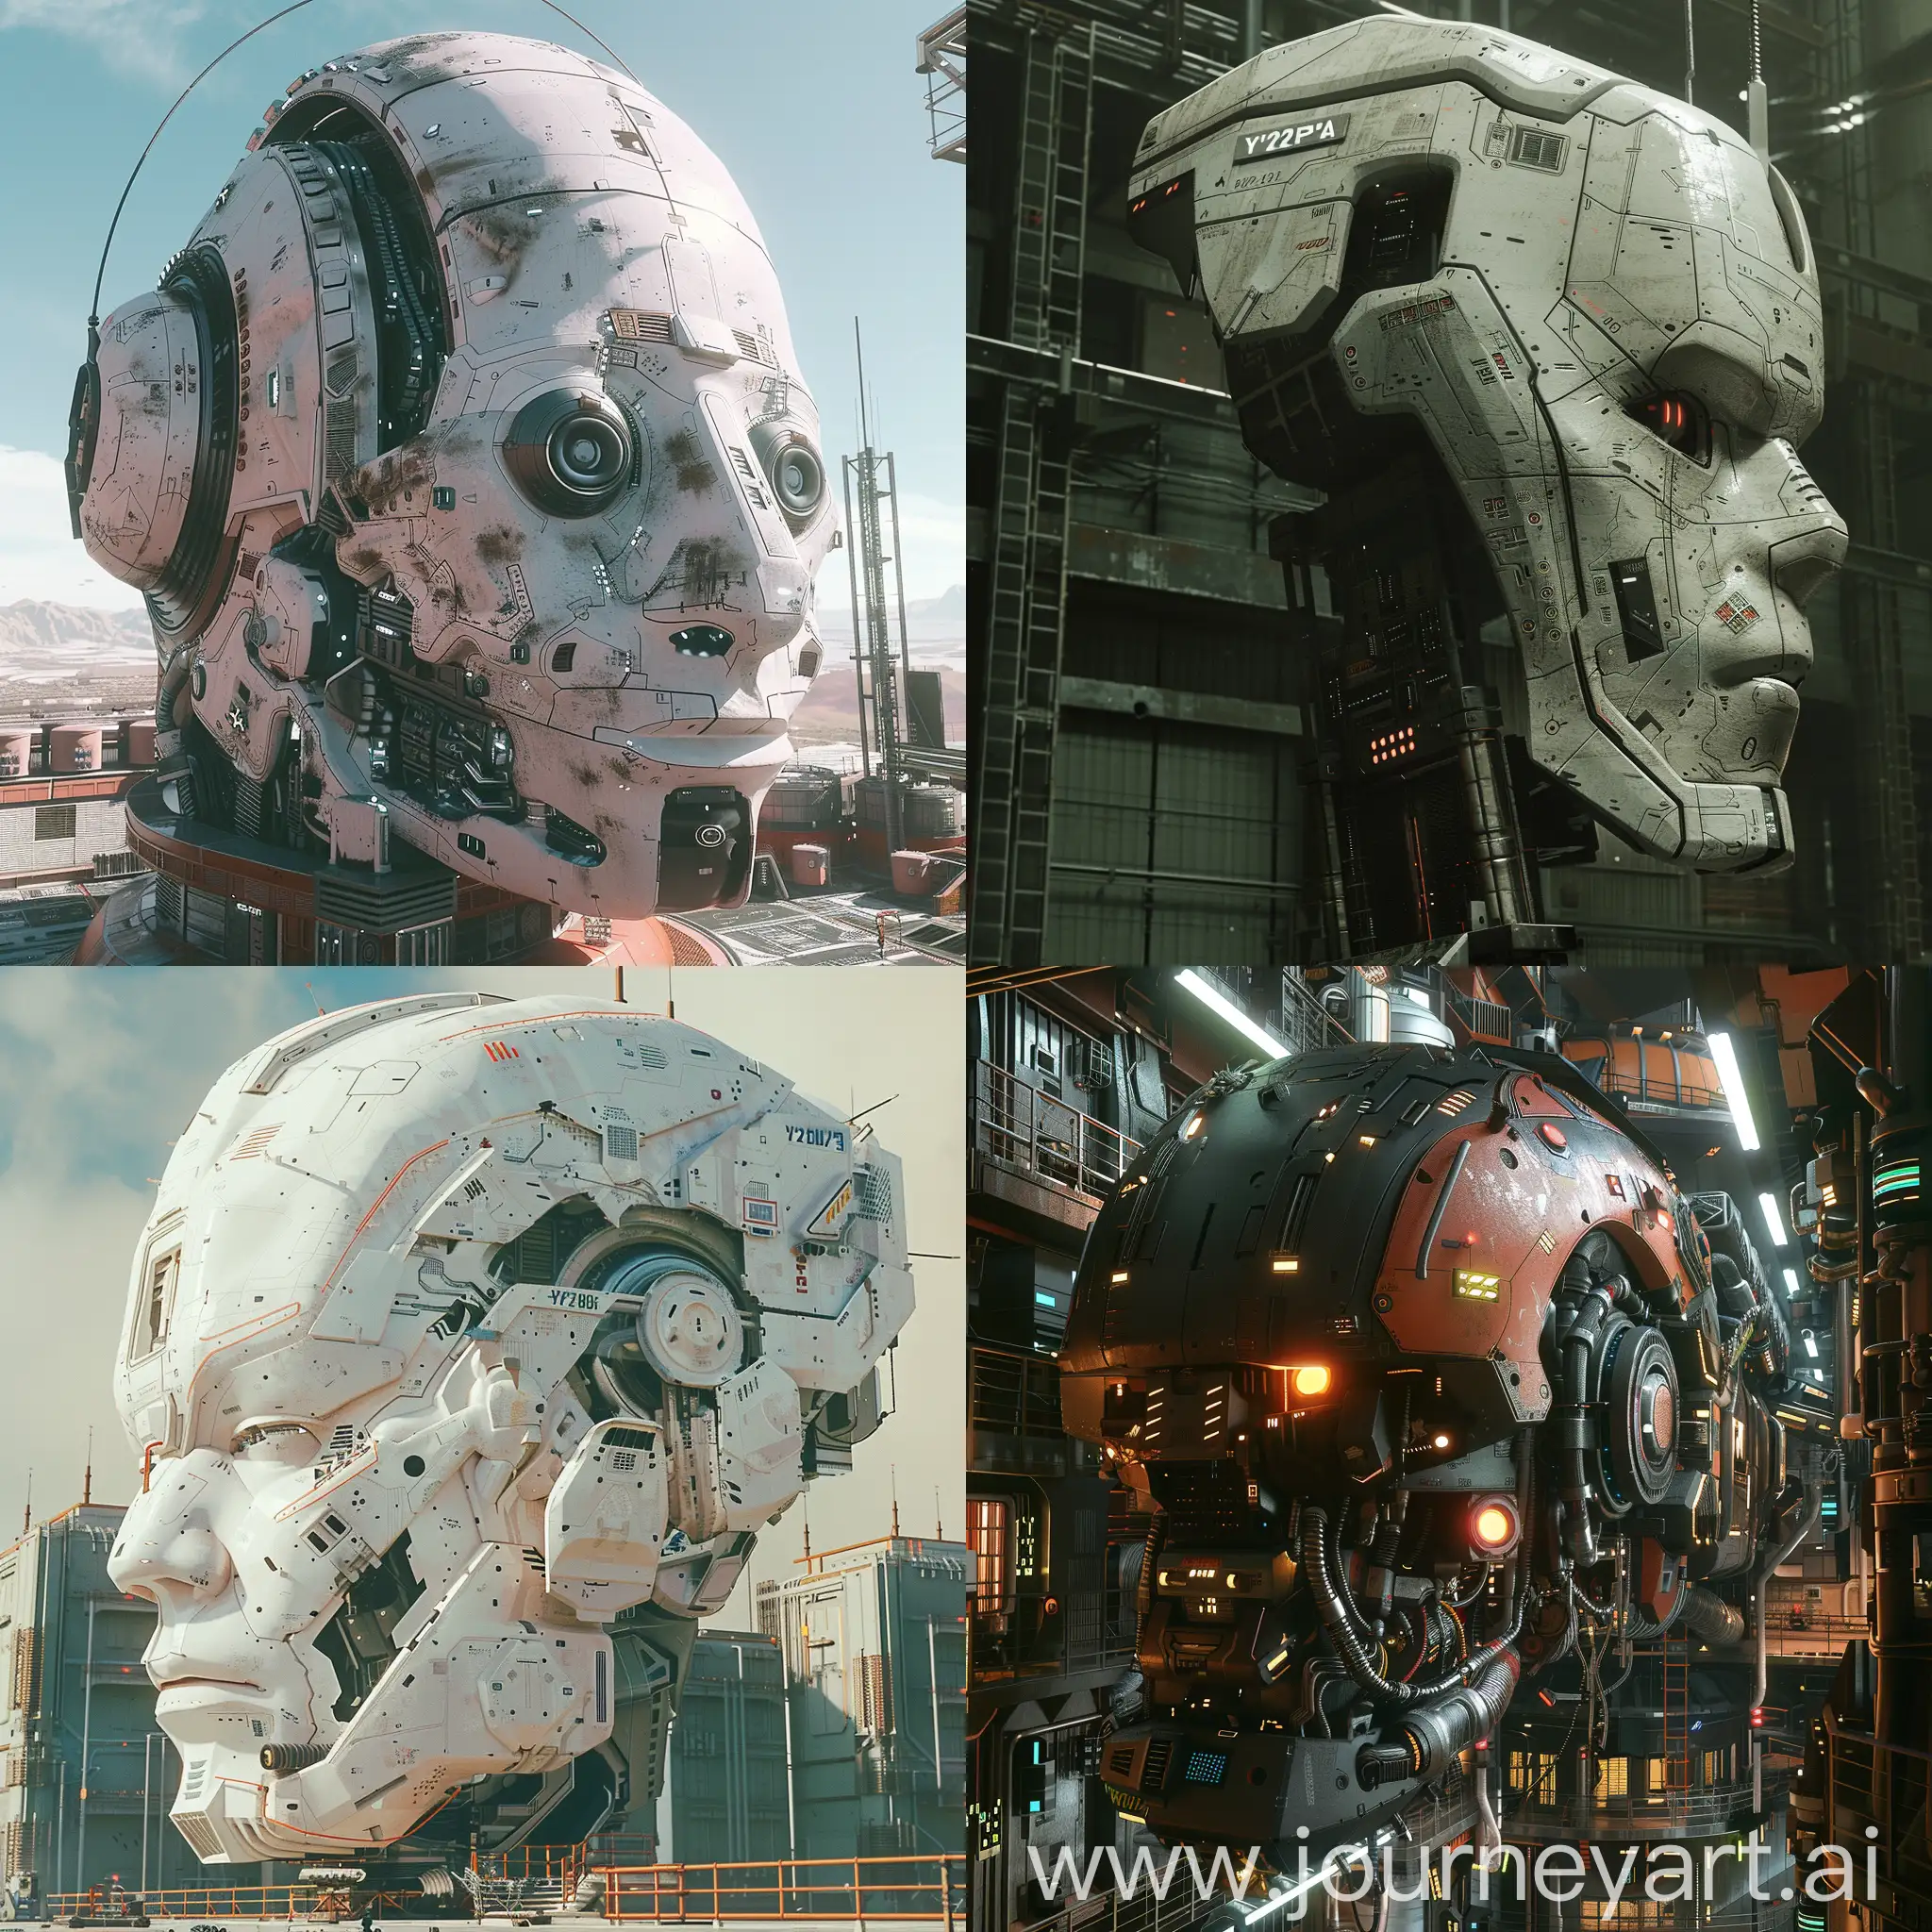 a giant robot head from a early old 2000s game, genre, retro, modern, futurism, y2k aesthetic, nostalgic trend, environment, old PlayStation 2 early 2000s graphics, render, old video game, old graphics, 
